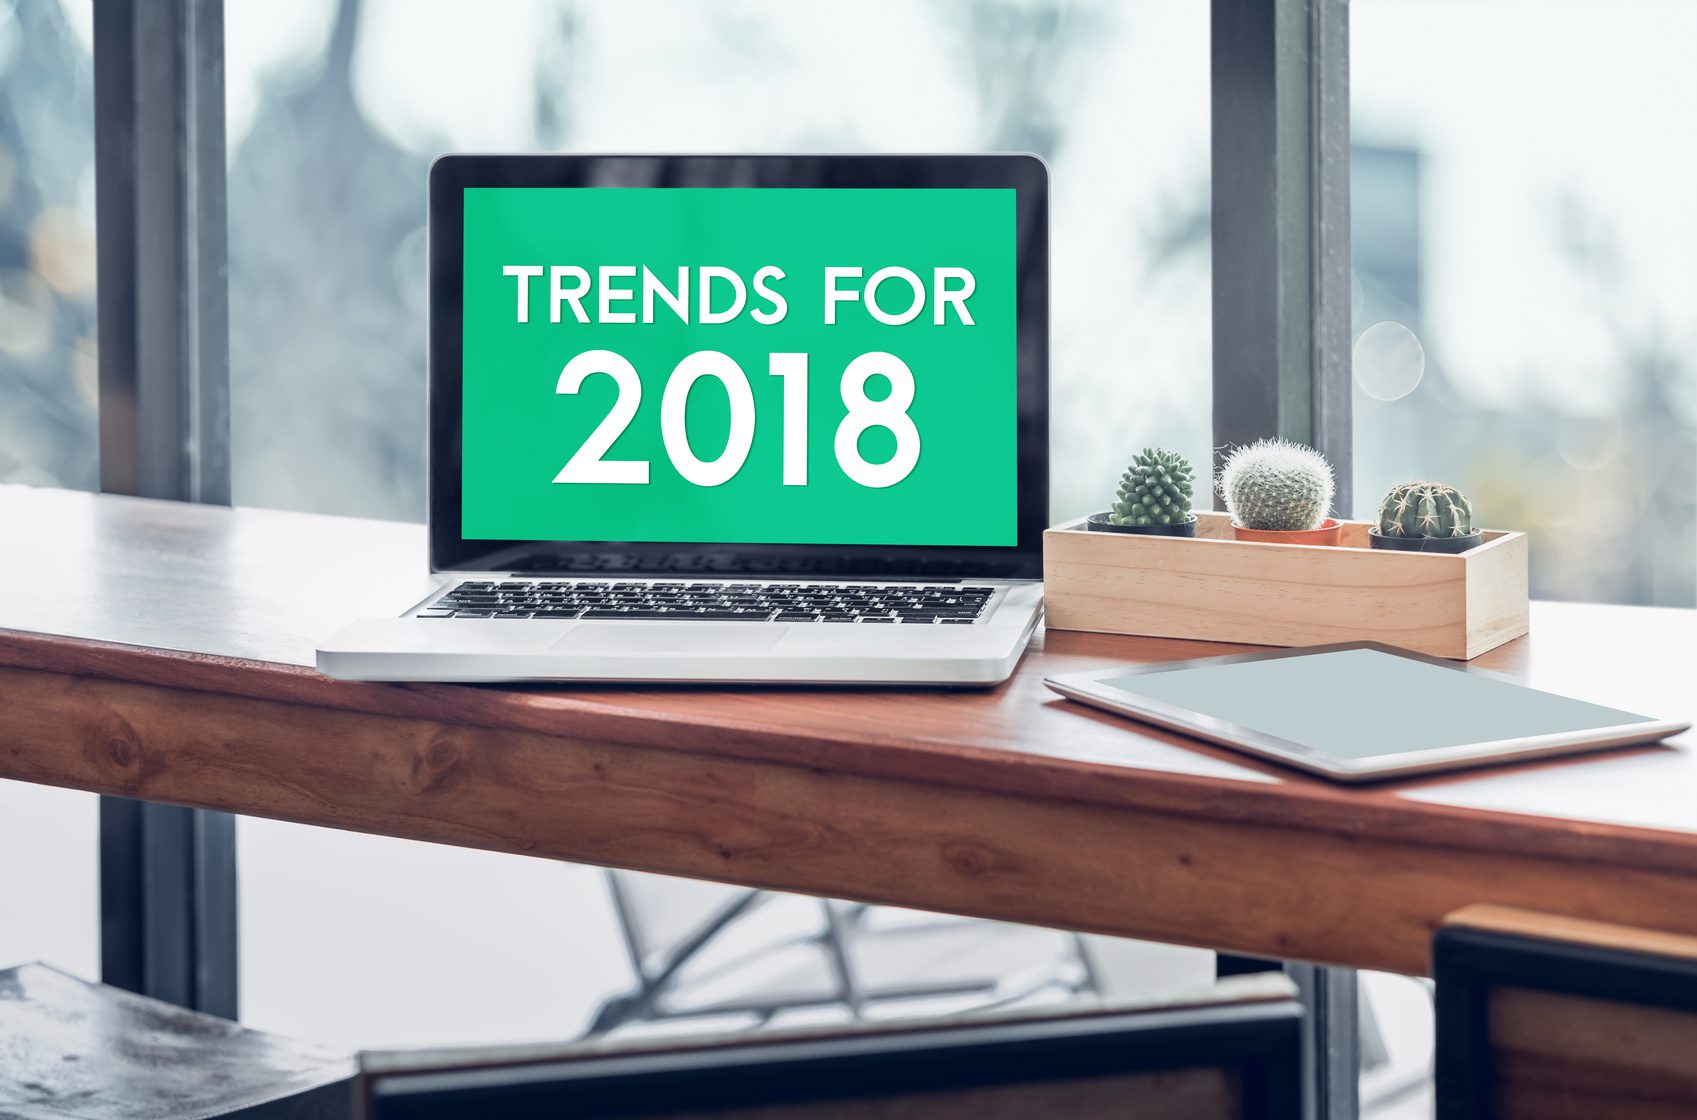 Top Trends to Watch in 2018 for Social Media Marketing